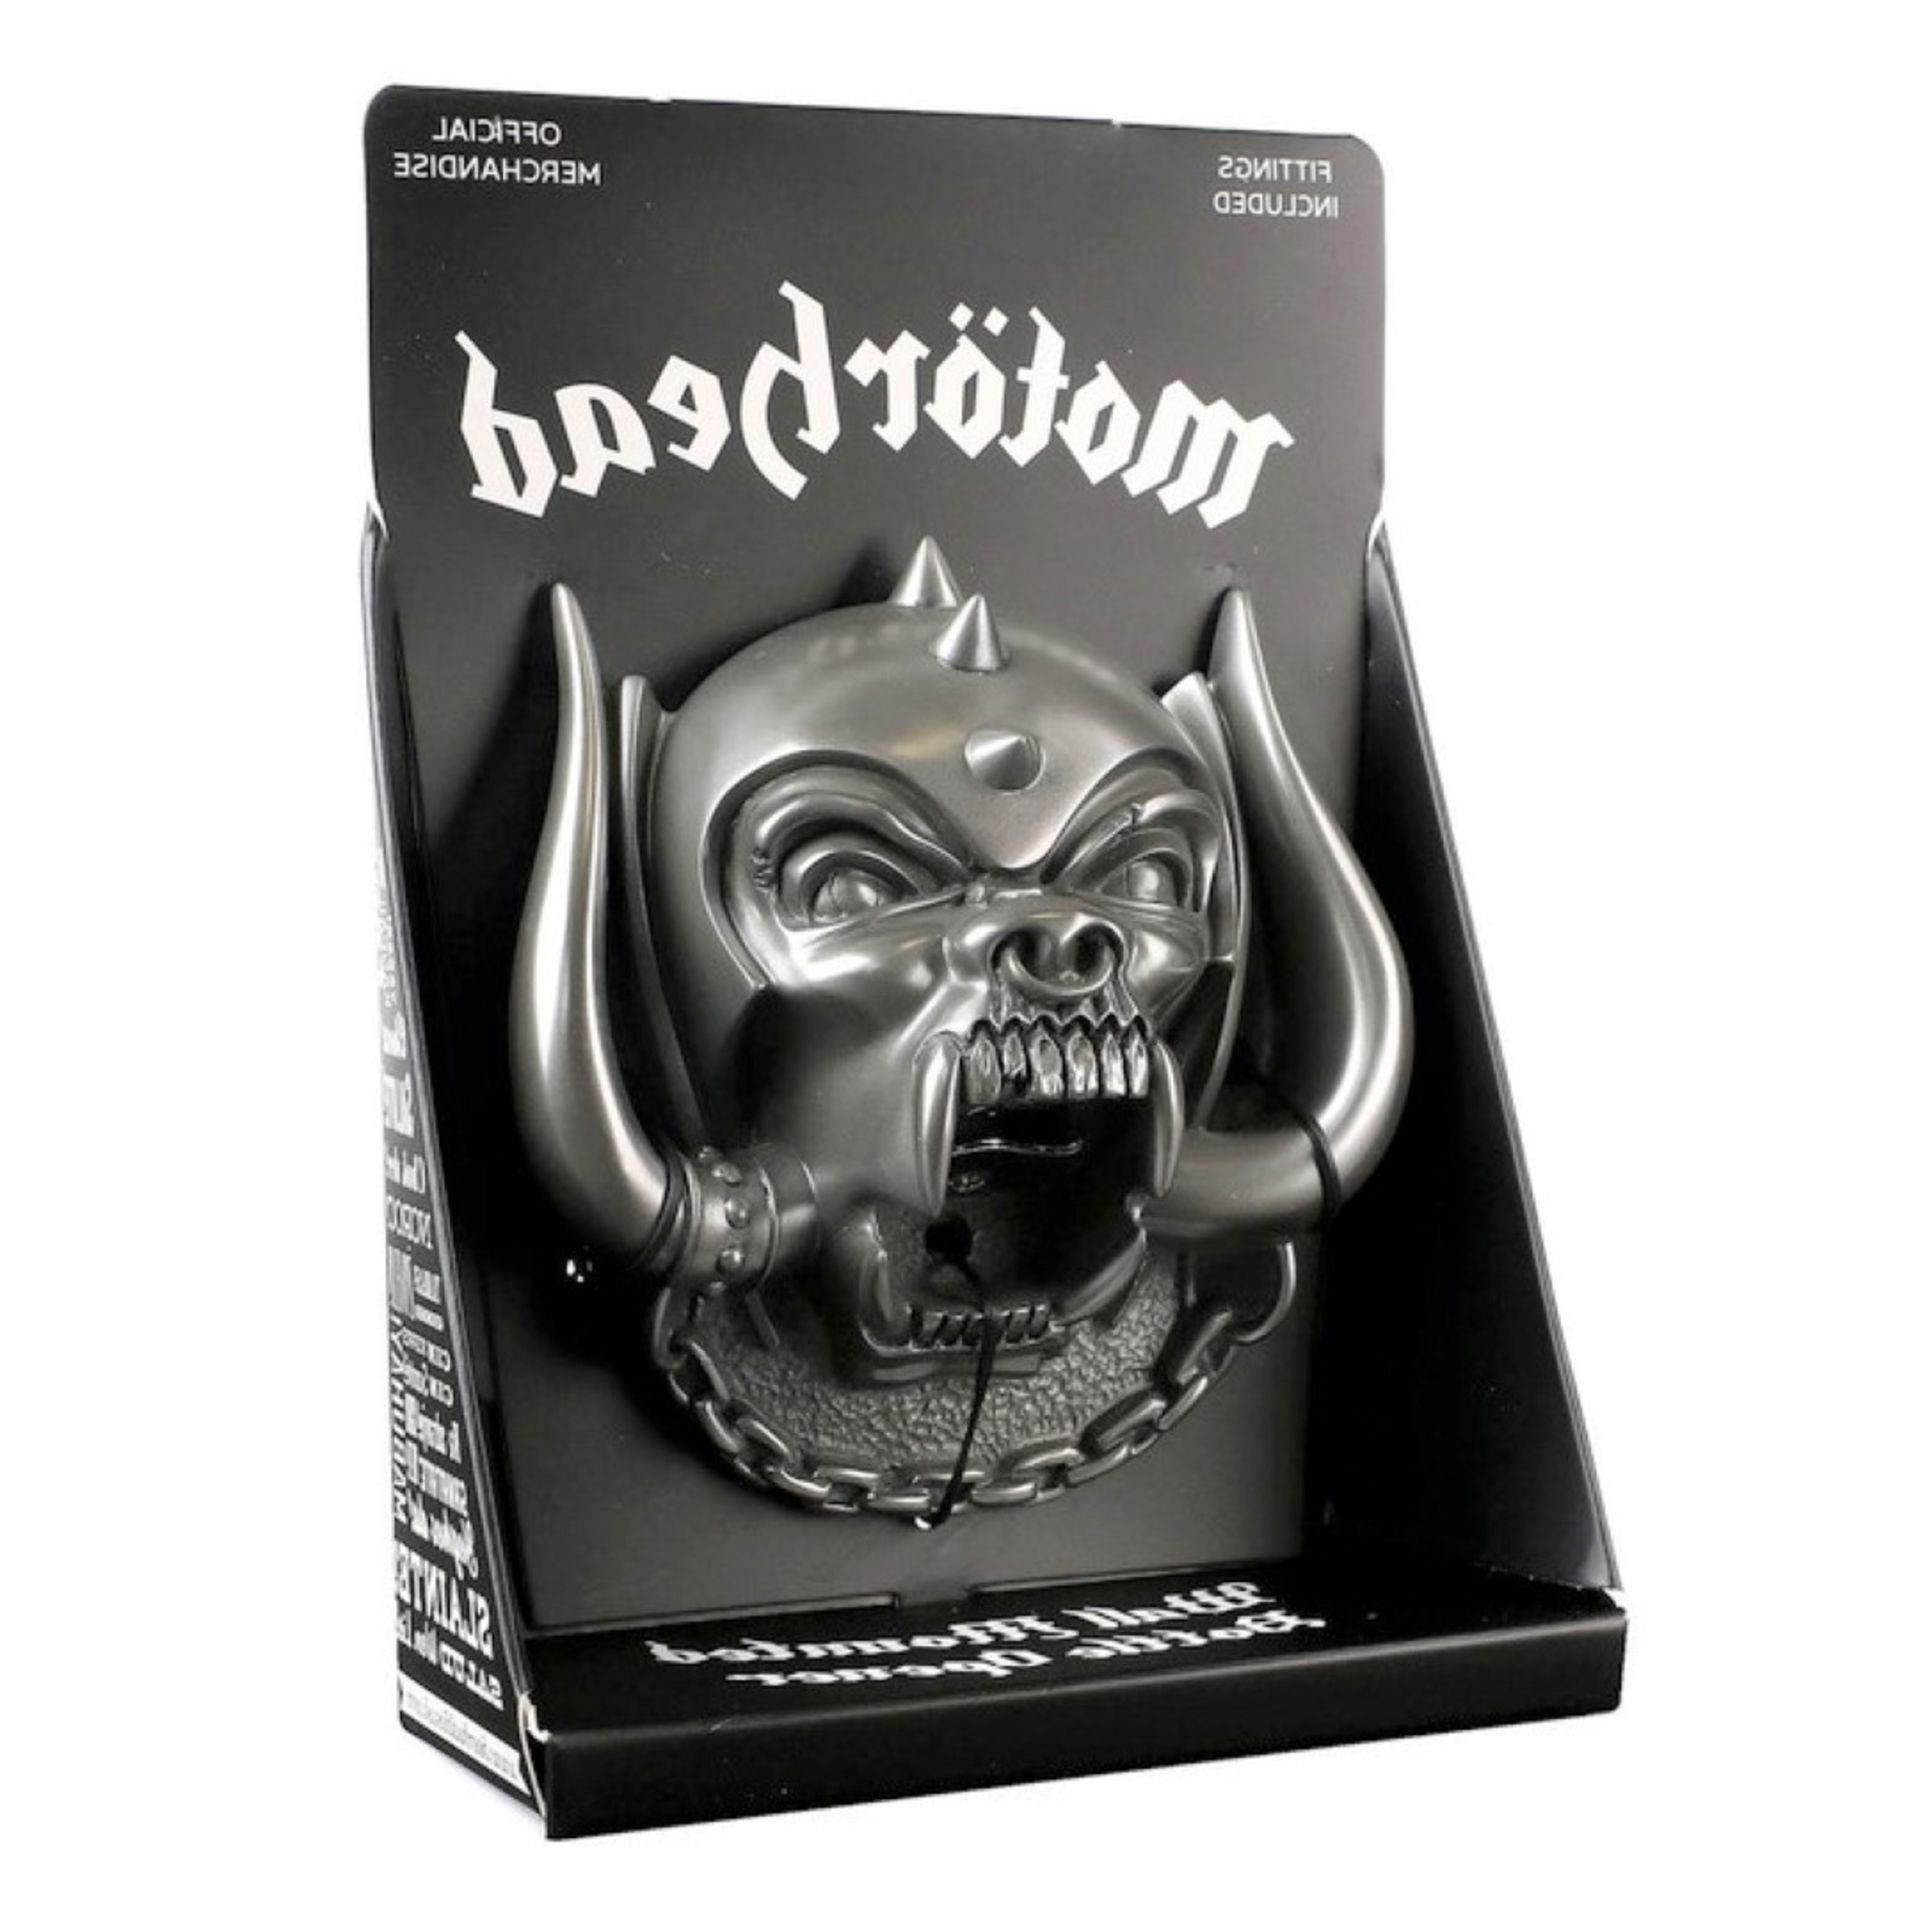 1 x Motorhead Wall Mounted Bottle Opener - Snaggletooth With a Gun Metal Finish - By Beer Buddies -